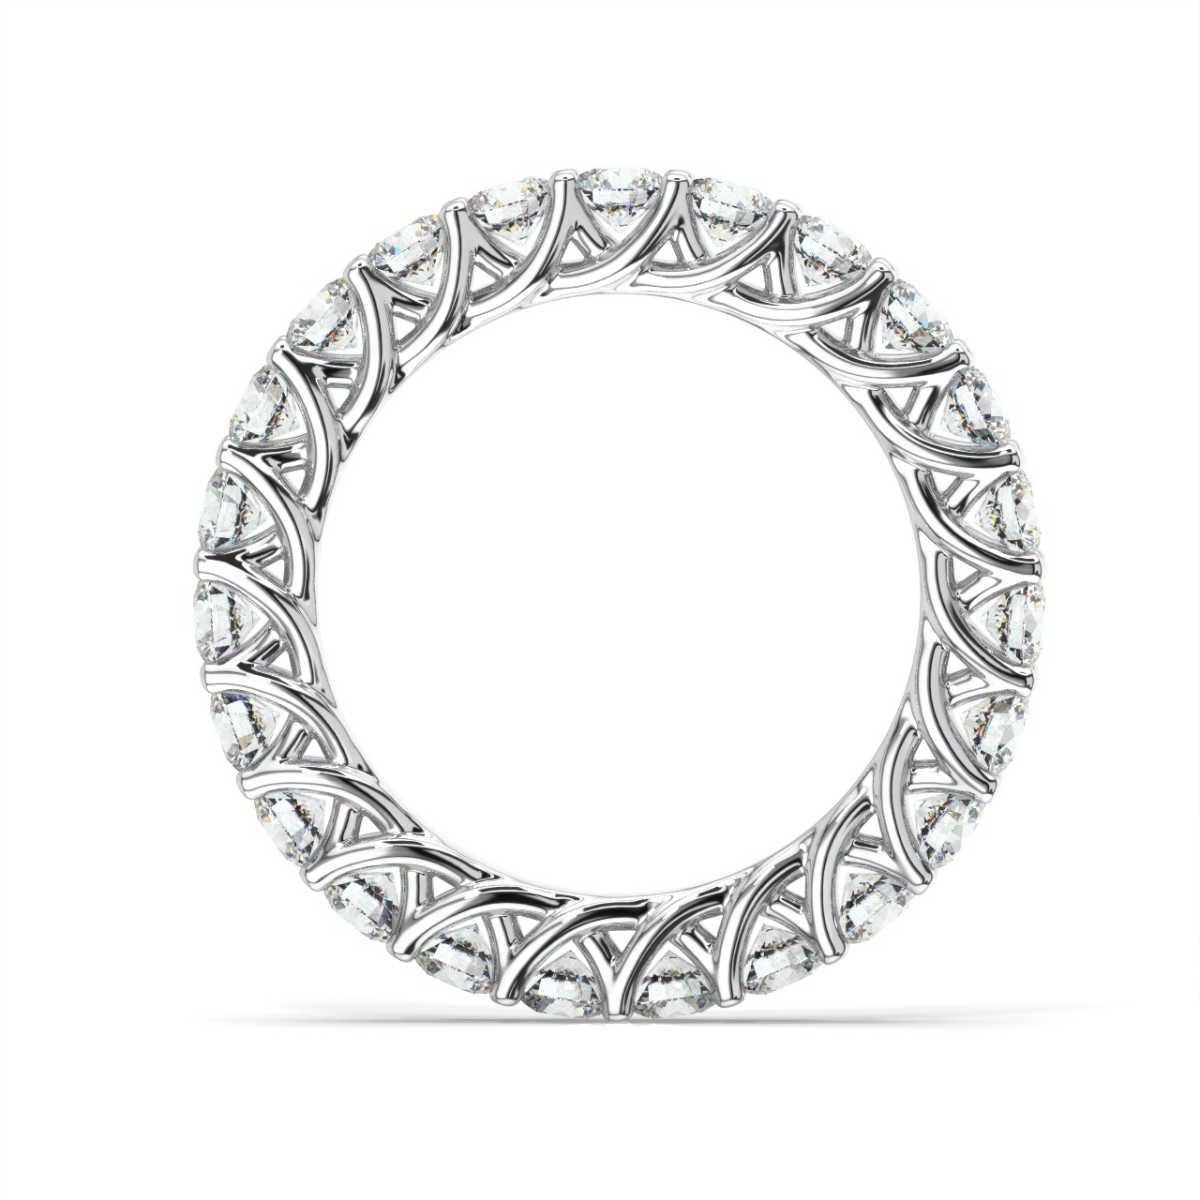 This stunning weave eternity ring features 23 perfectly matched round brilliant diamonds. Experience the difference!

Product details: 

Center Gemstone Color: WHITE
Side Gemstone Type: NATURAL DIAMOND
Side Gemstone Shape: ROUND
Metal: 14K White